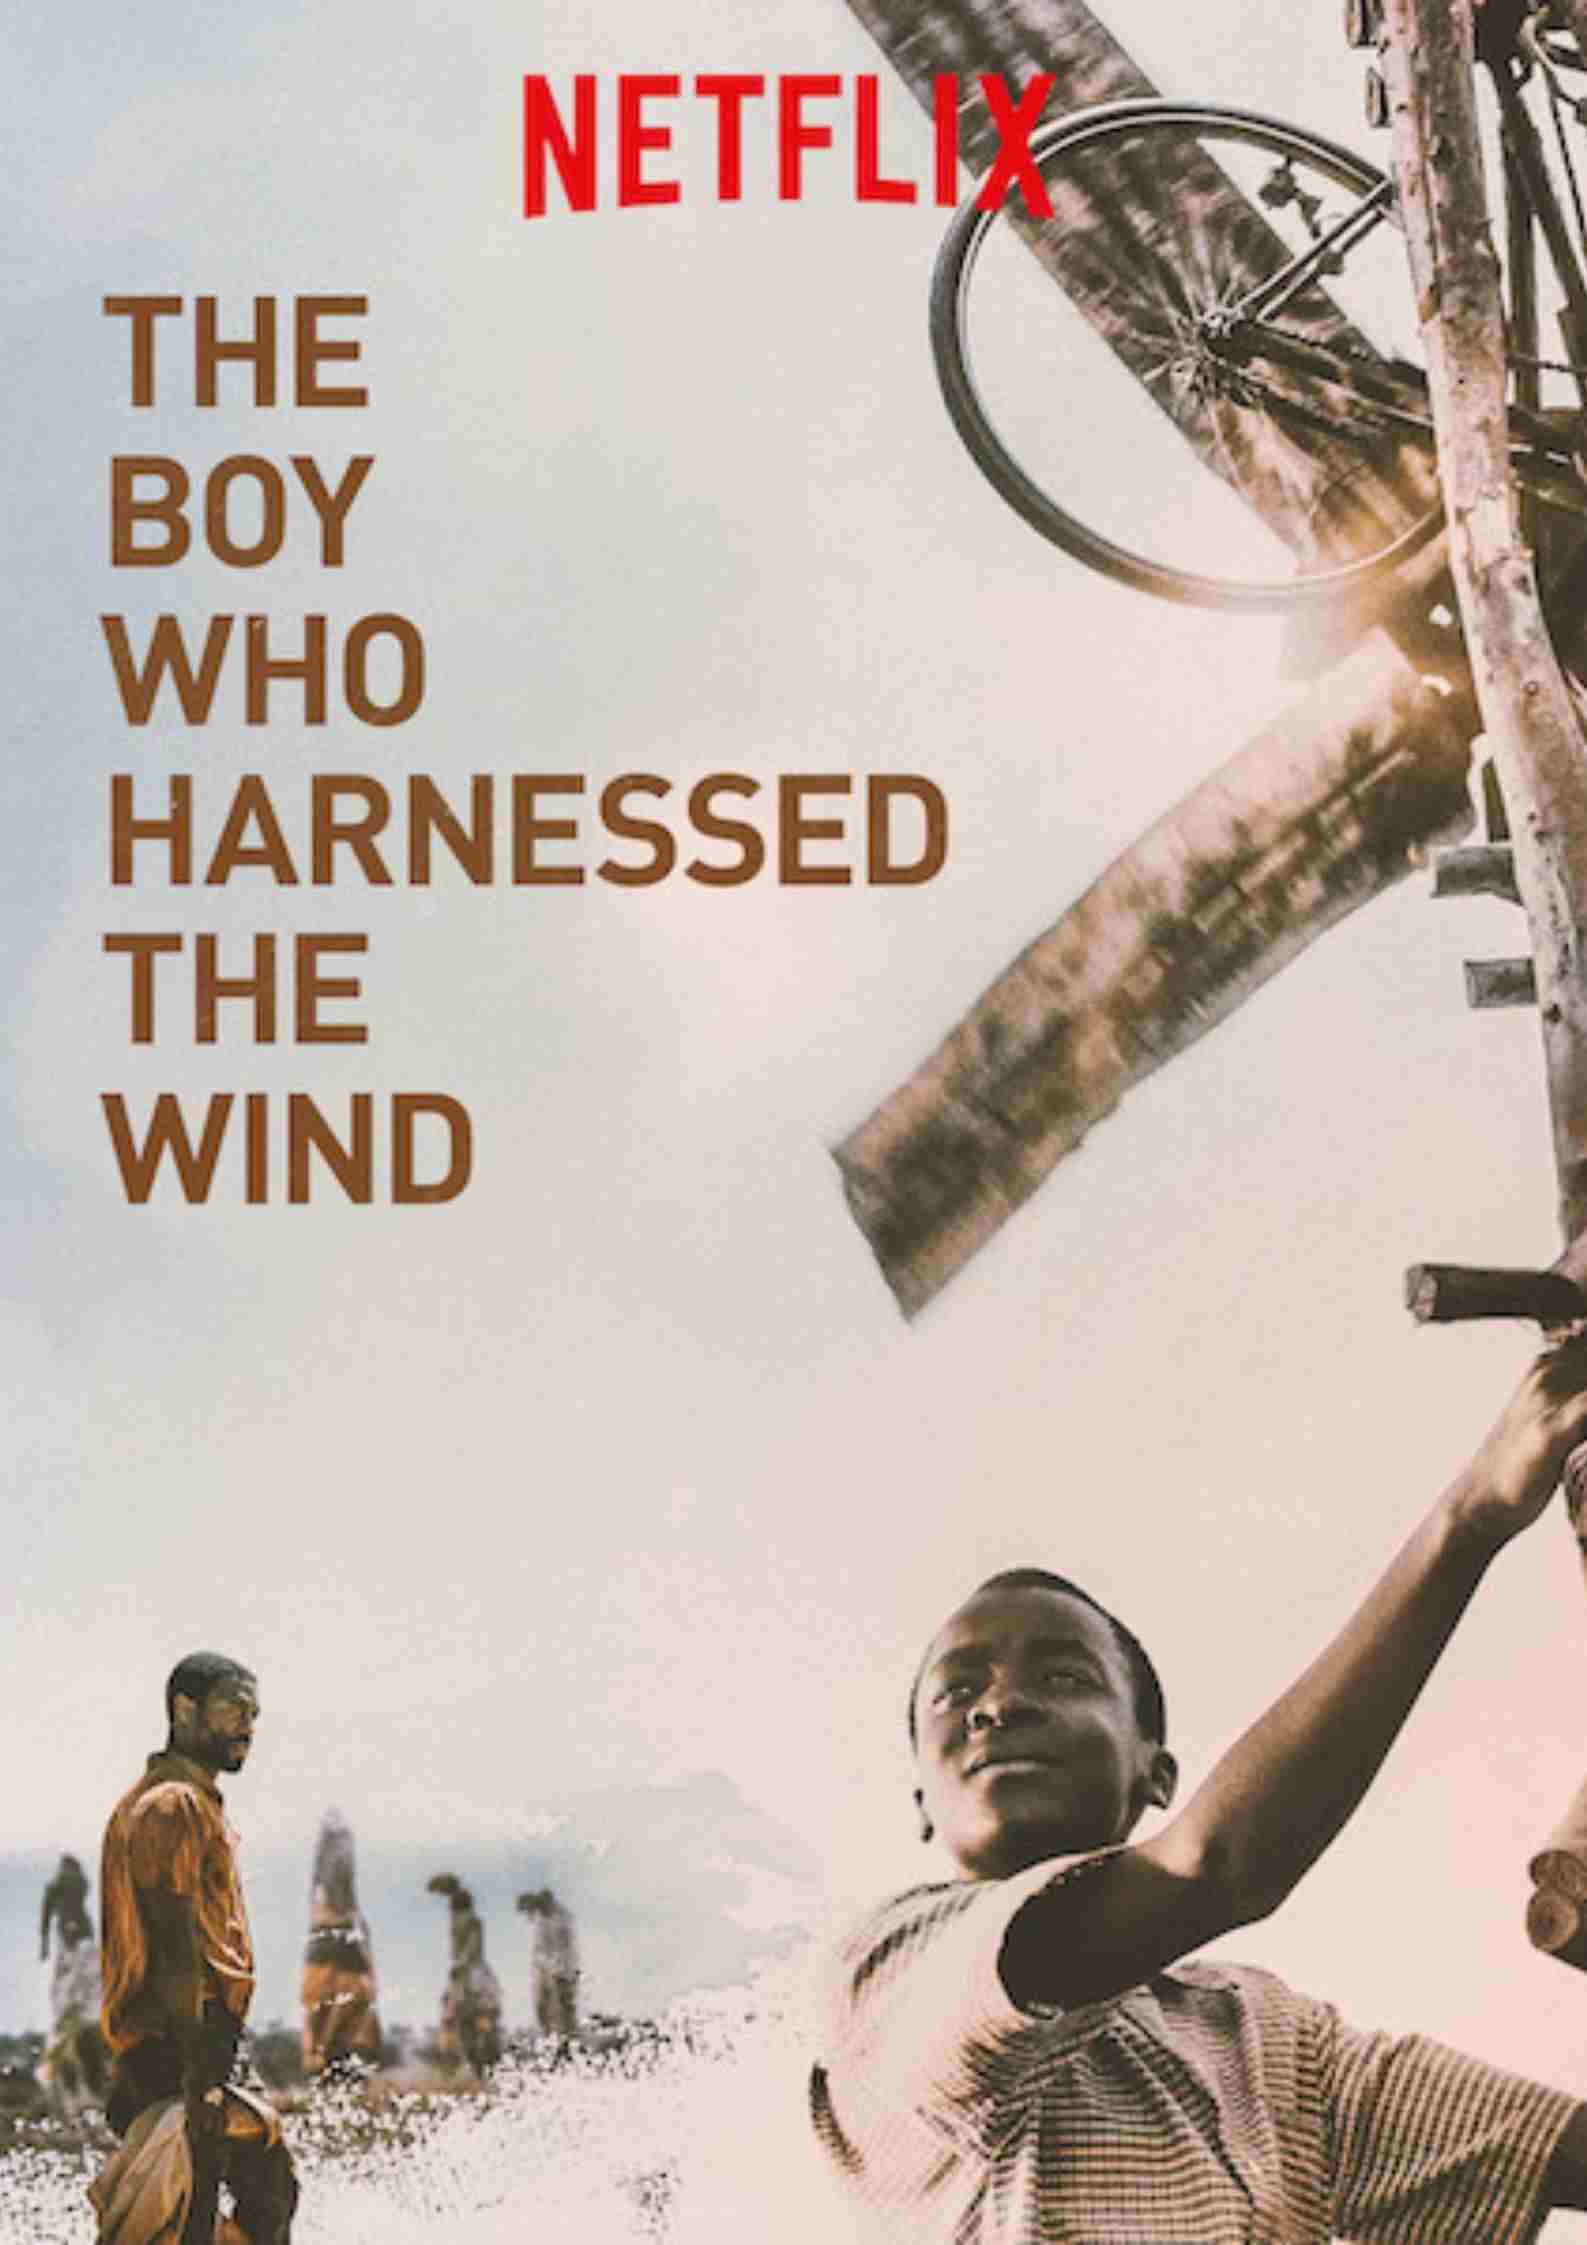 The Boy Who Harnessed the Wind Wallpaper and Images